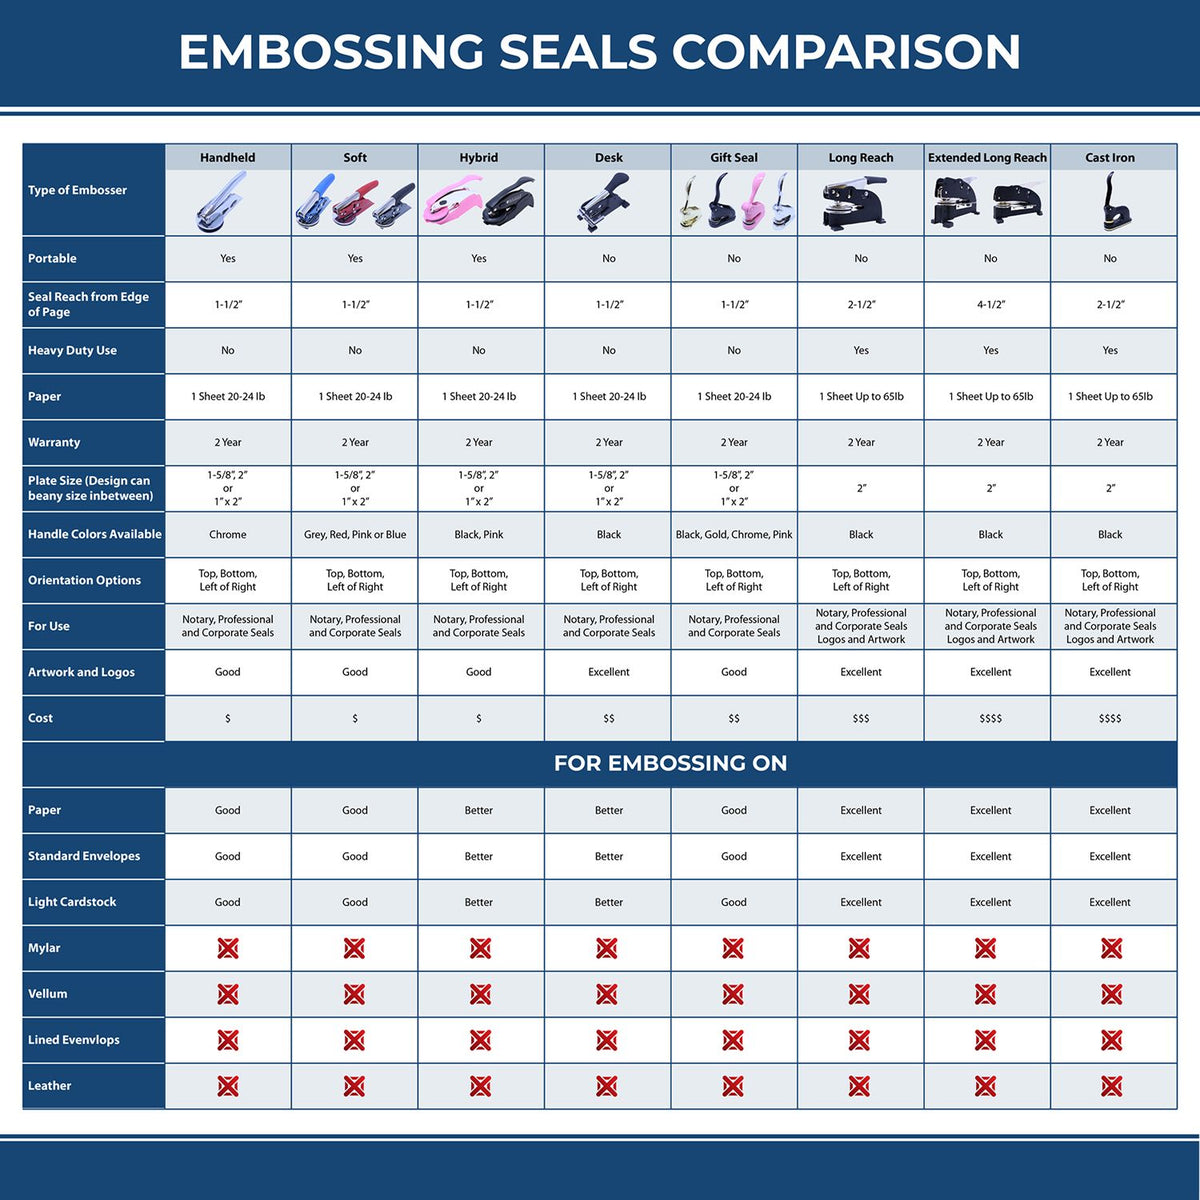 A comparison chart for the different types of mount models available for the Long Reach Connecticut PE Seal.